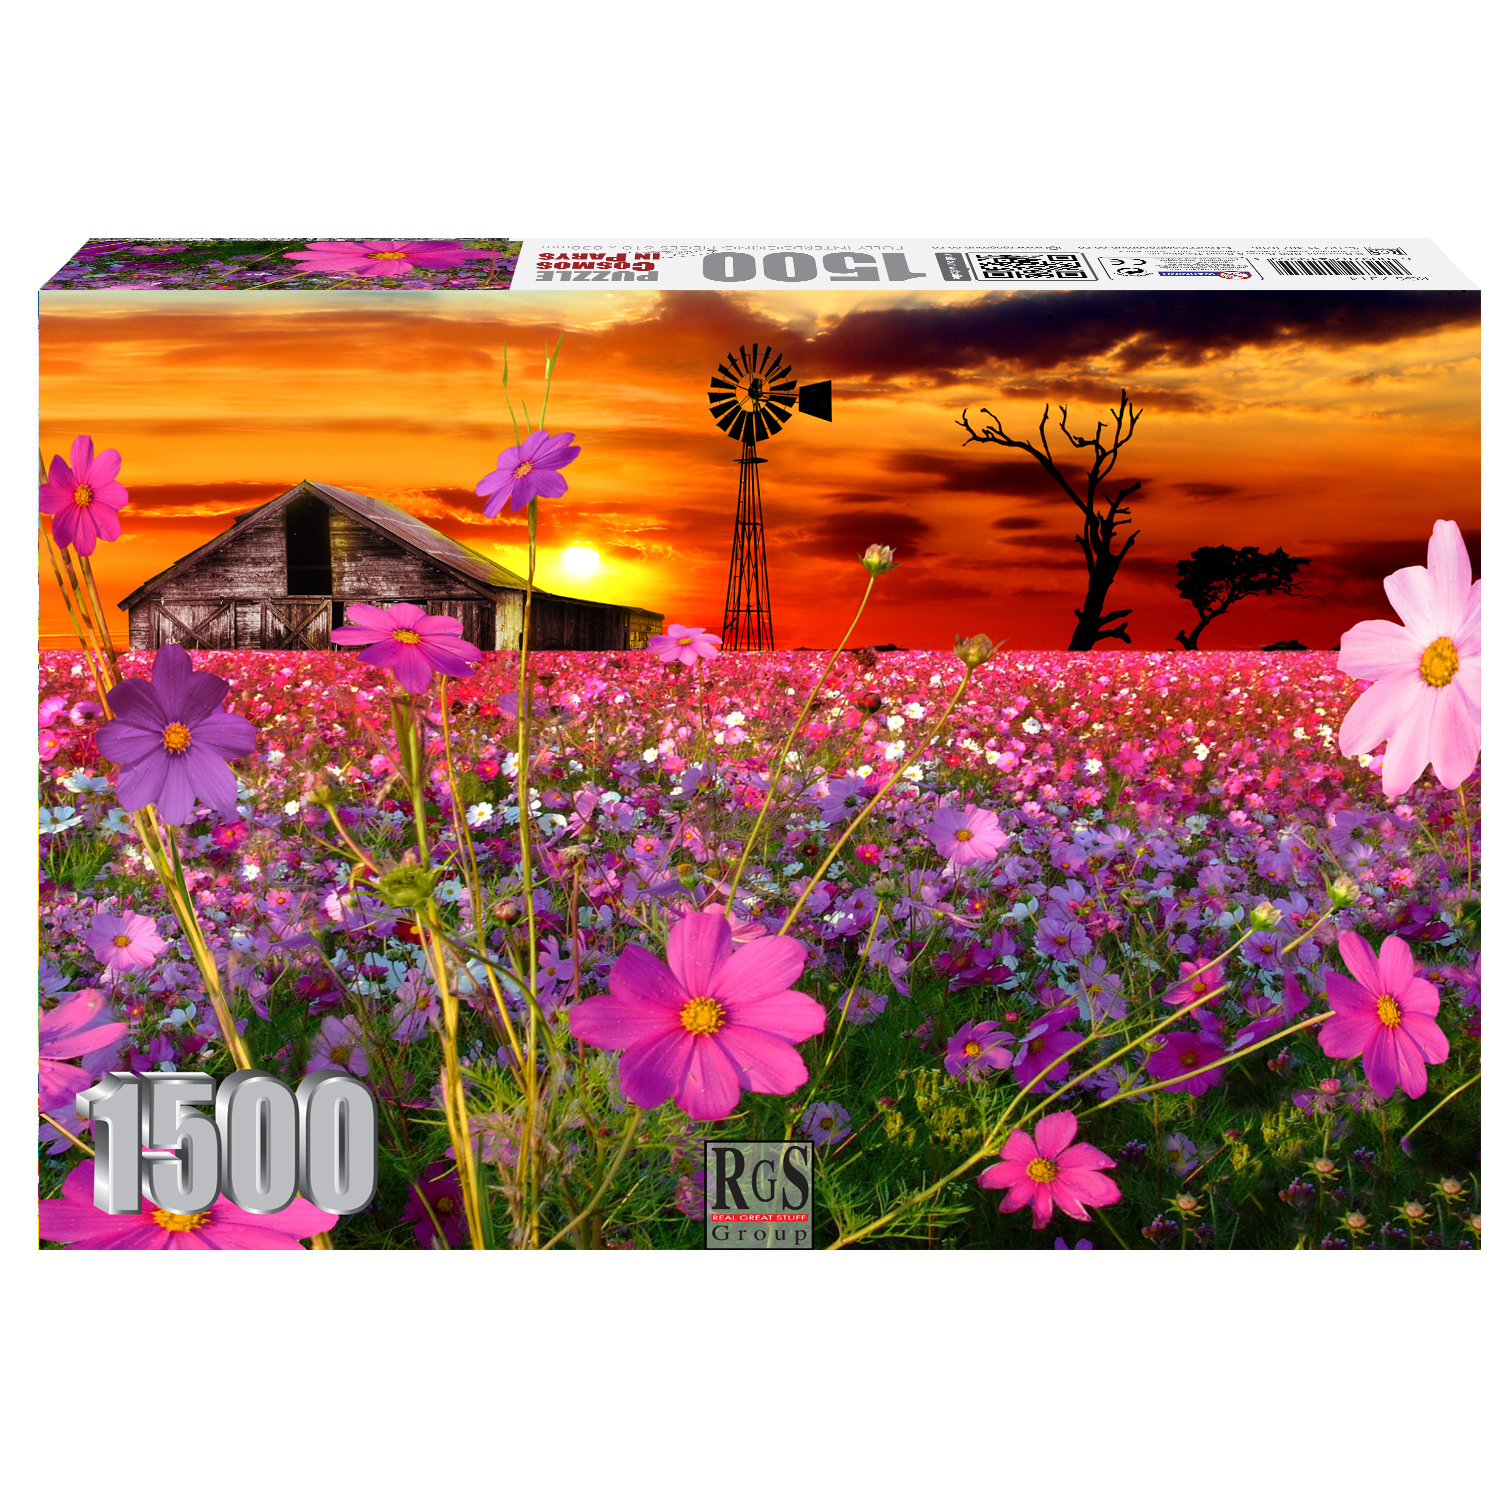 Puzzle box of 1500pc puzzle of sunset in with Cosmos, a windmill and barn